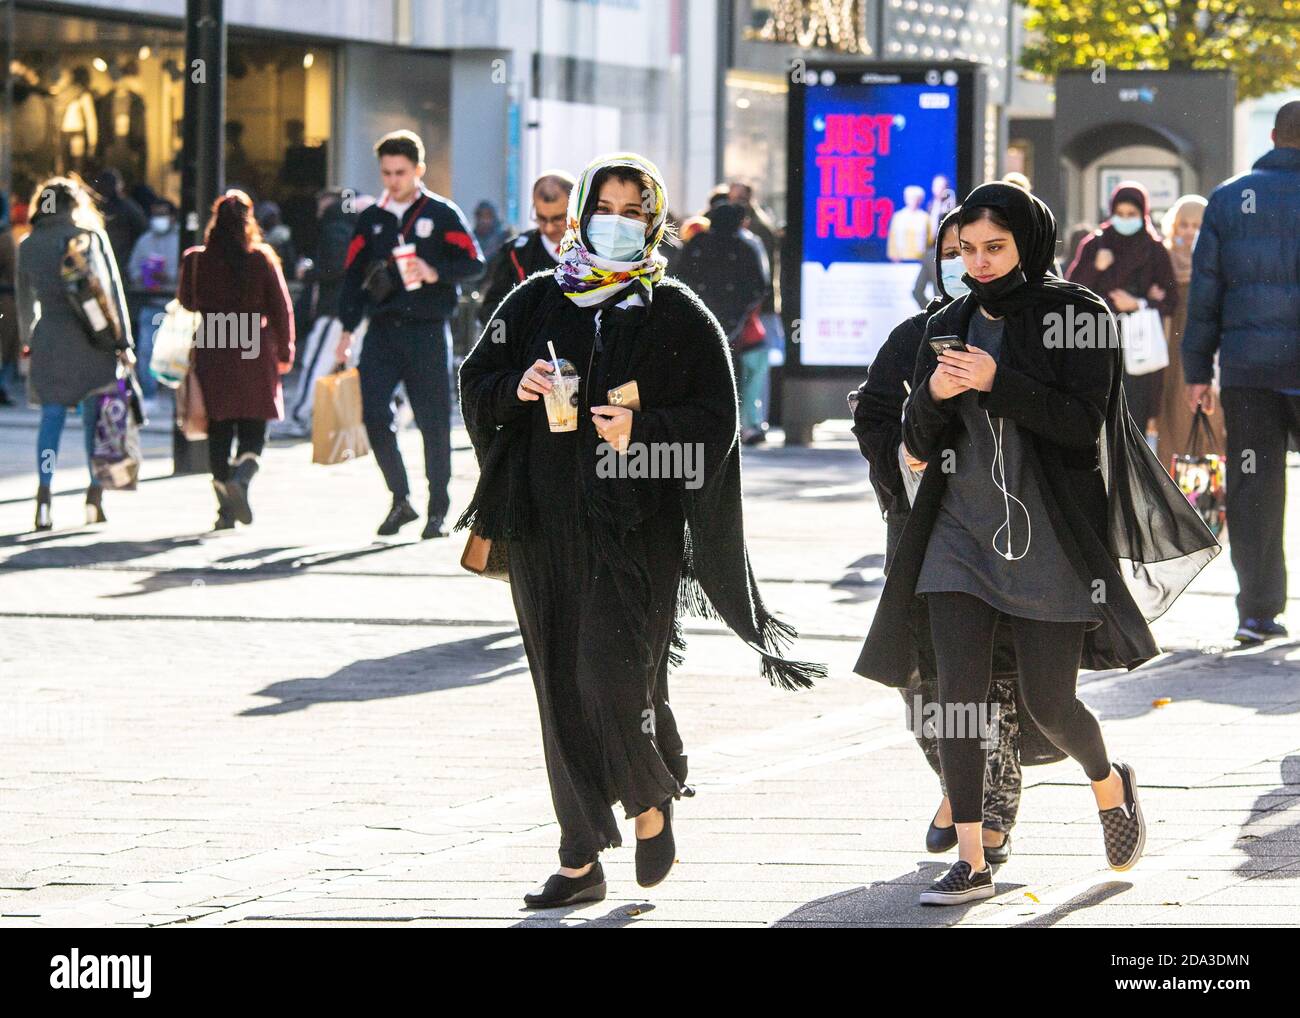 Shoppers wearing facemasks on the eve of the UK winter lockdown in November, Birmingham, UK. Just the Flu? sign in the background Stock Photo